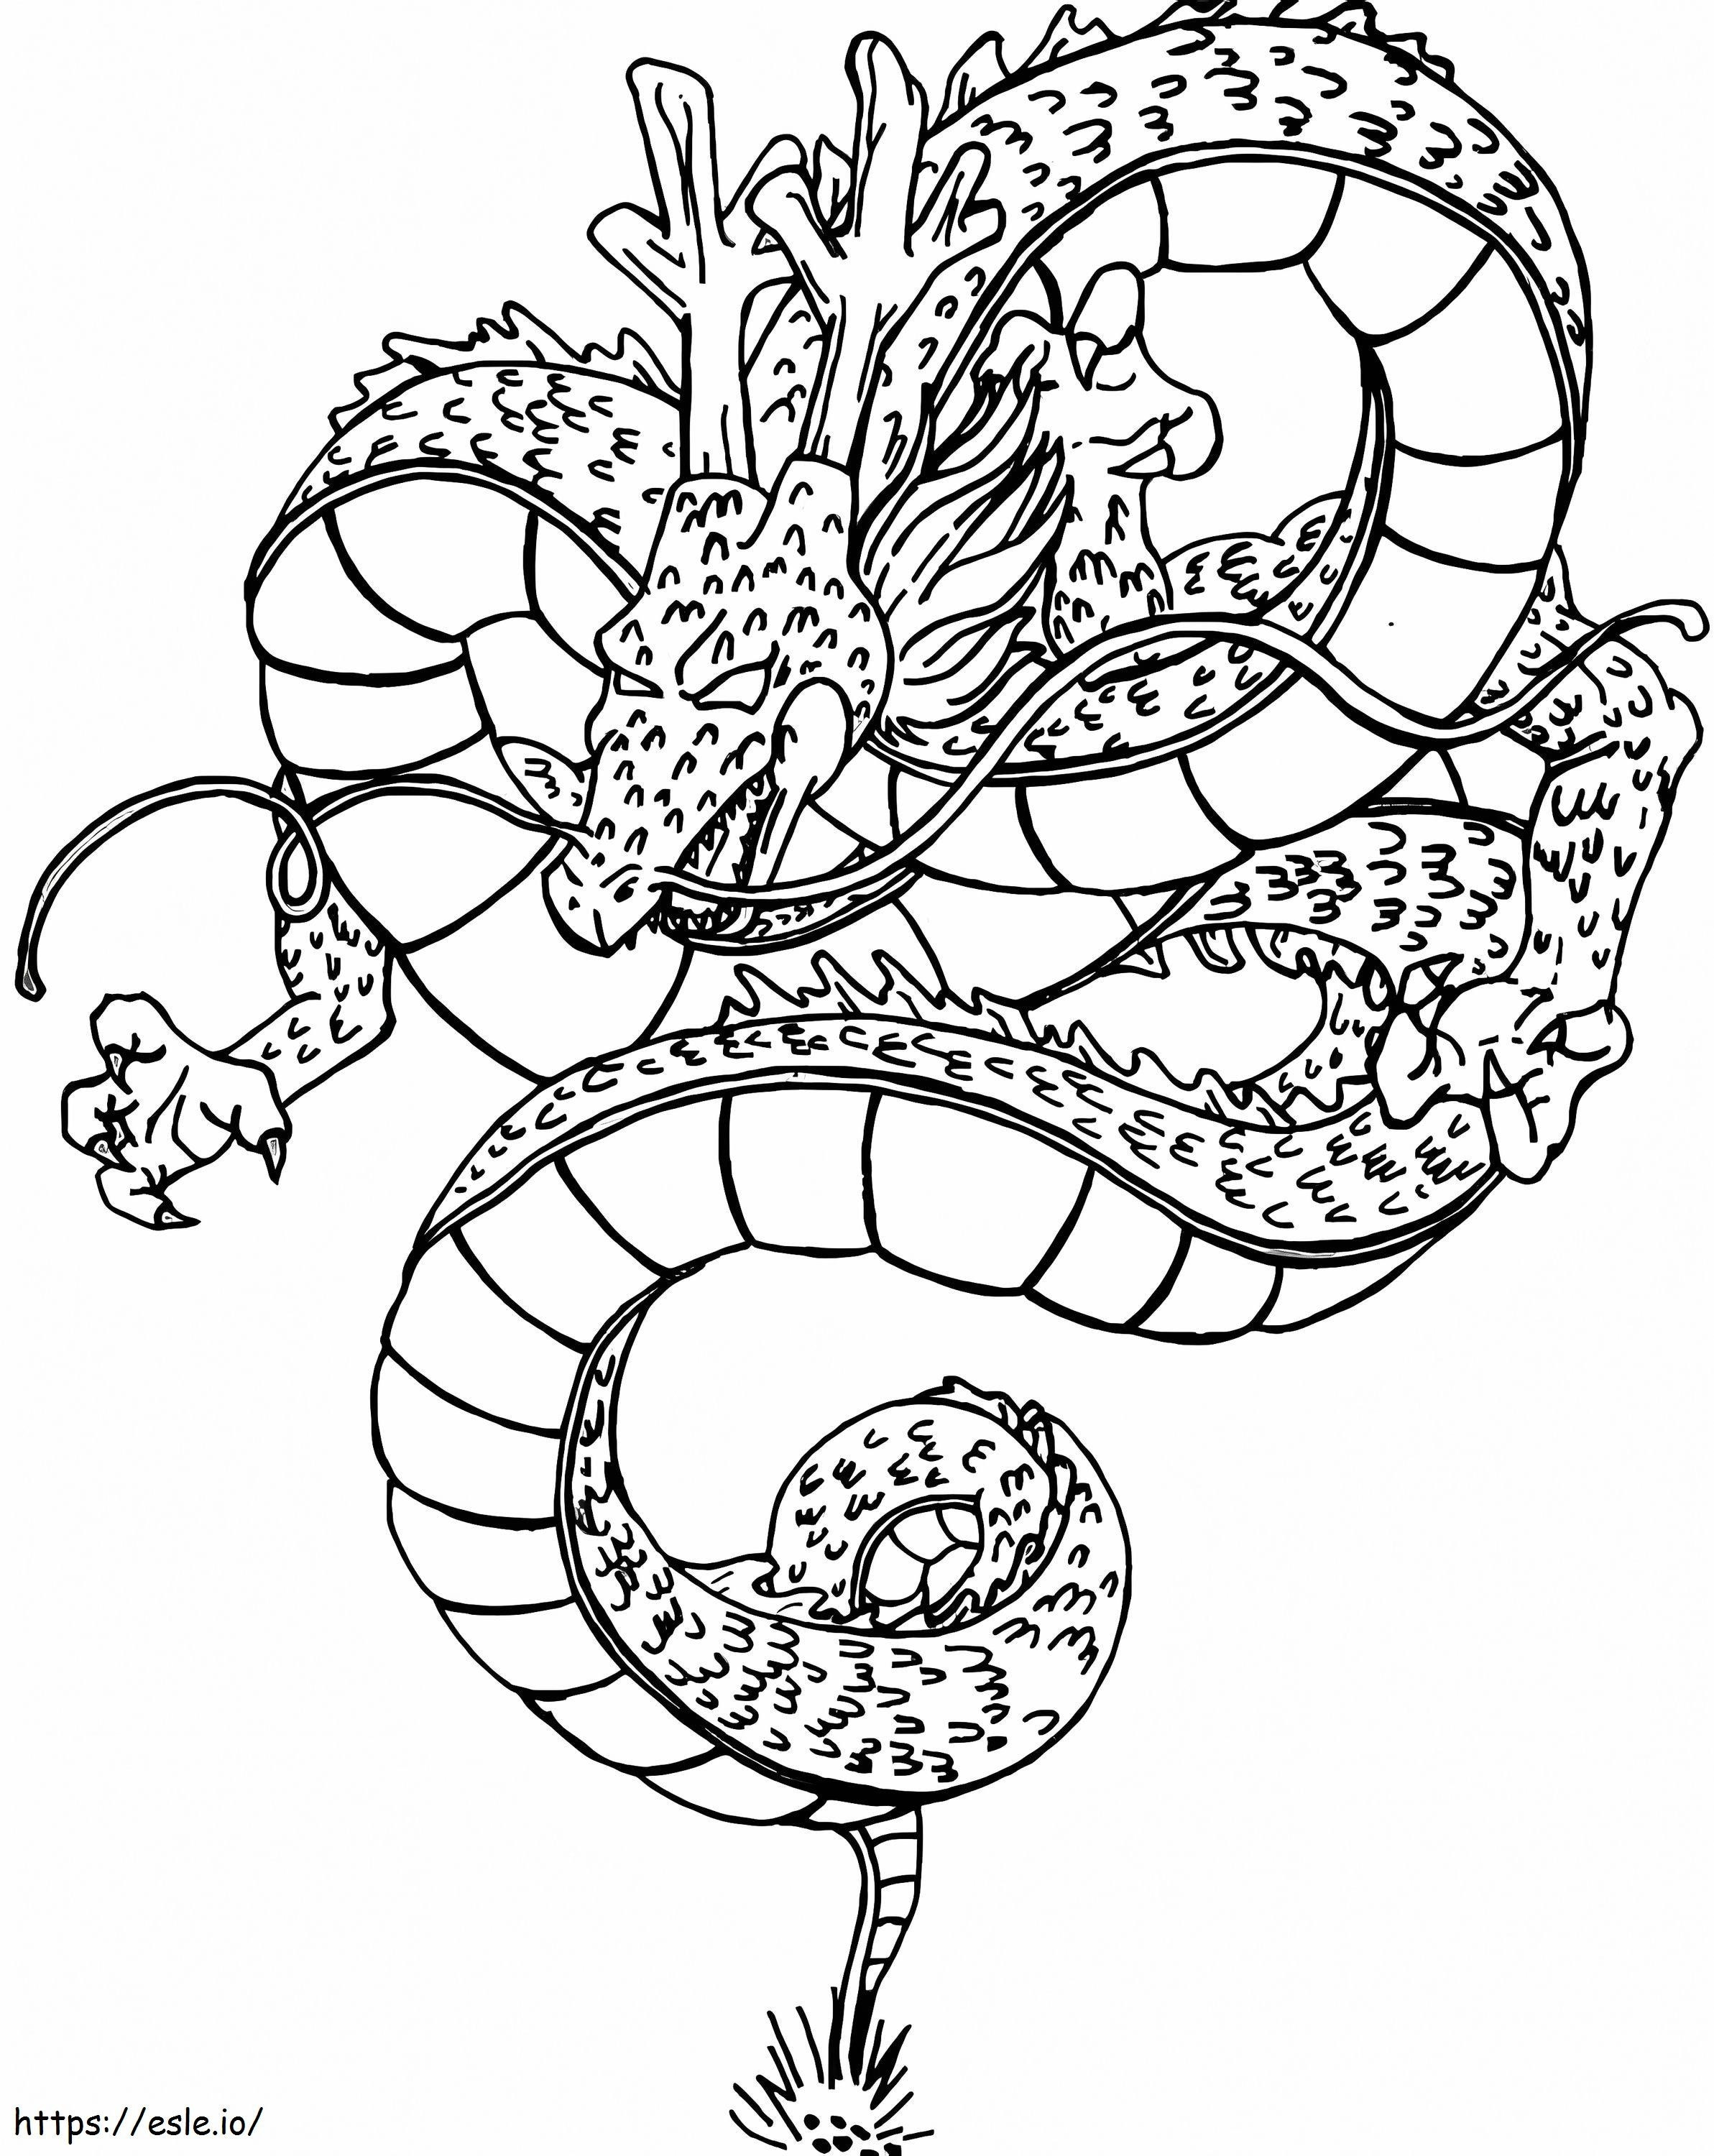 Shenron 3 coloring page